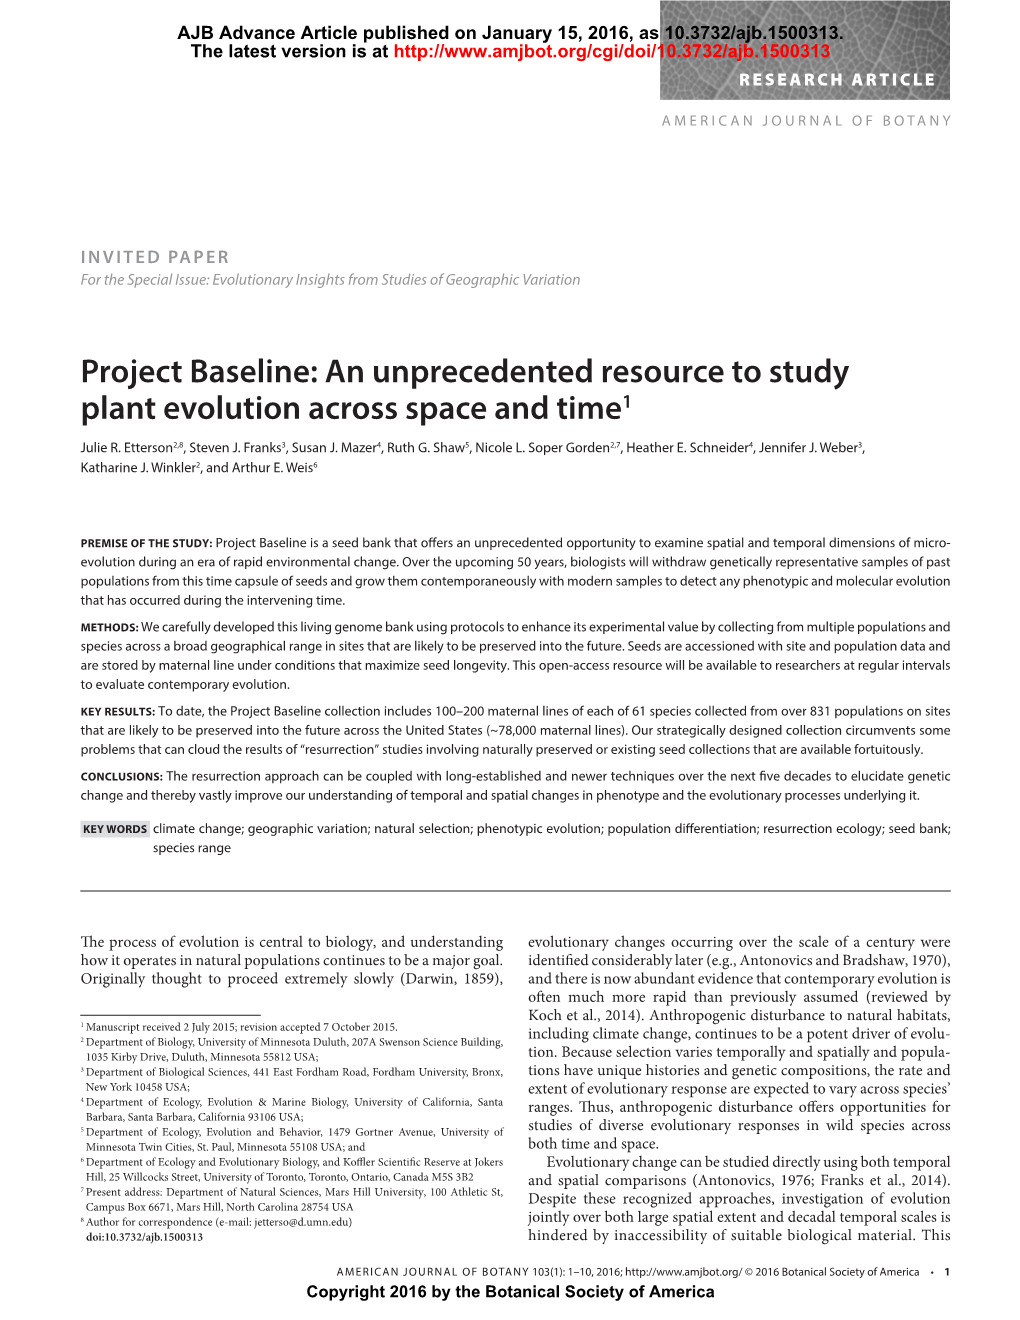 Project Baseline: an Unprecedented Resource to Study Plant Evolution Across Space and Time 1